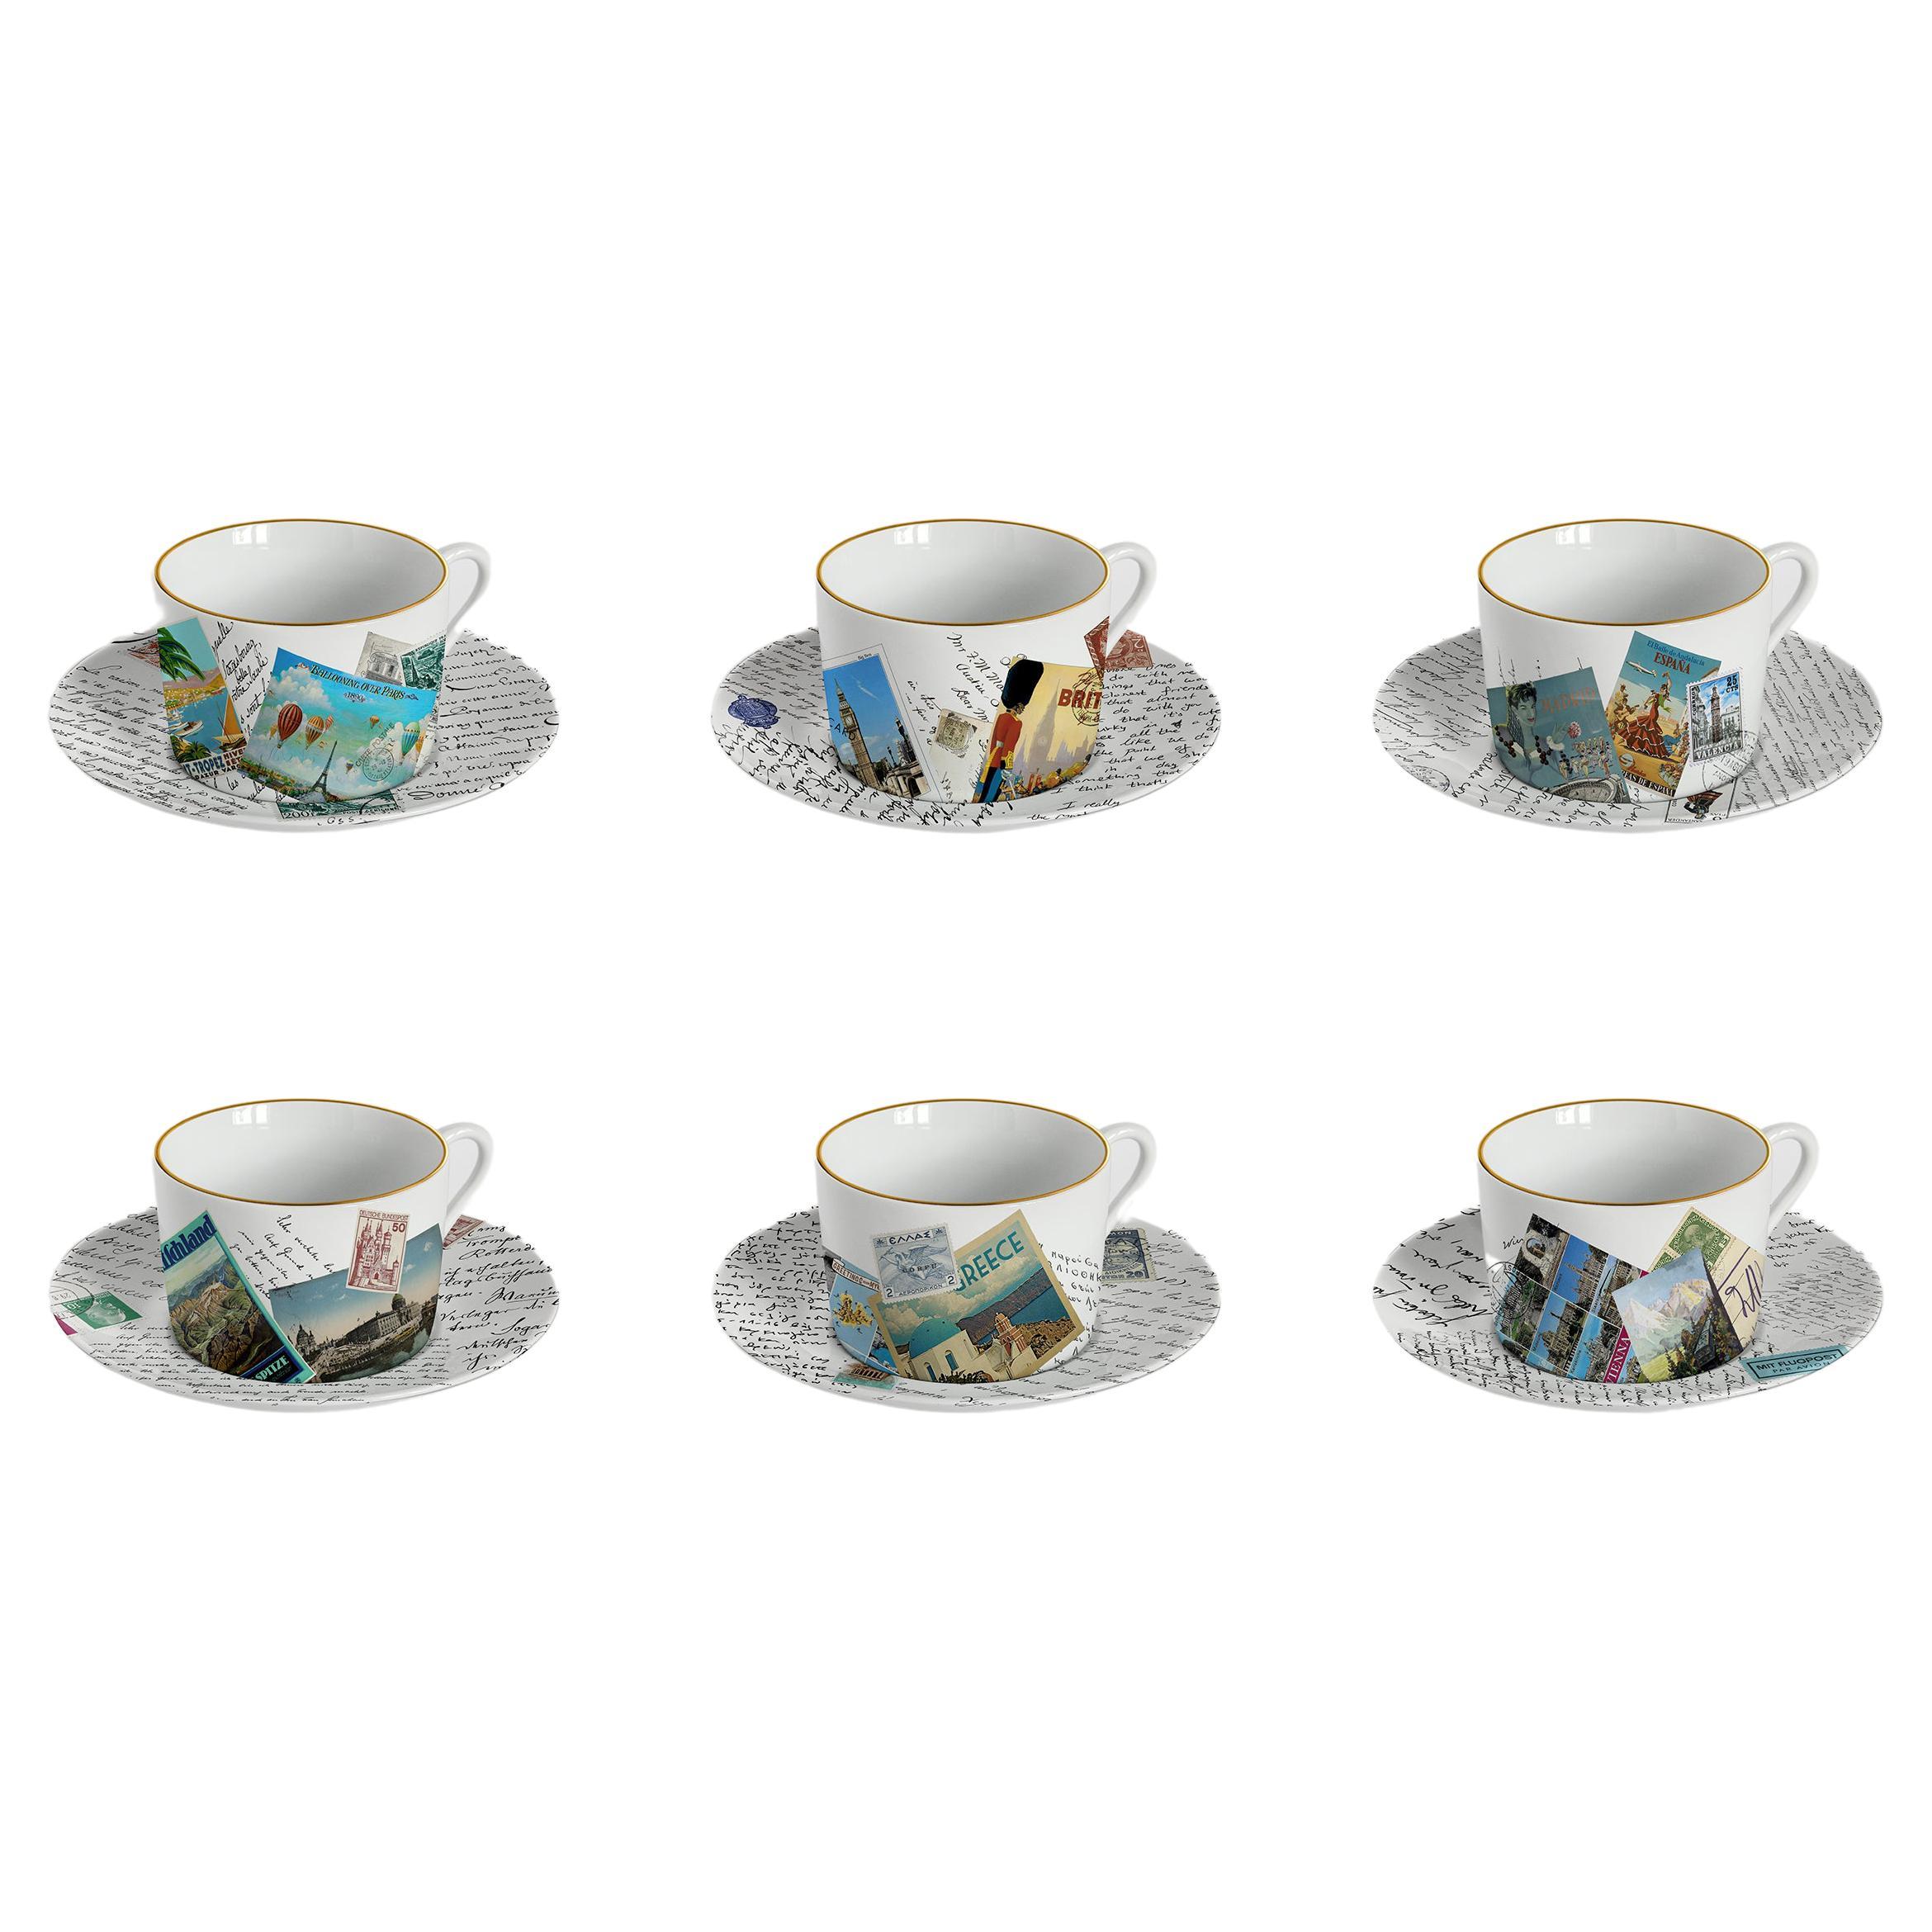 Corrispondenze, Six Contemporary Decorated Tea Cups with Plates